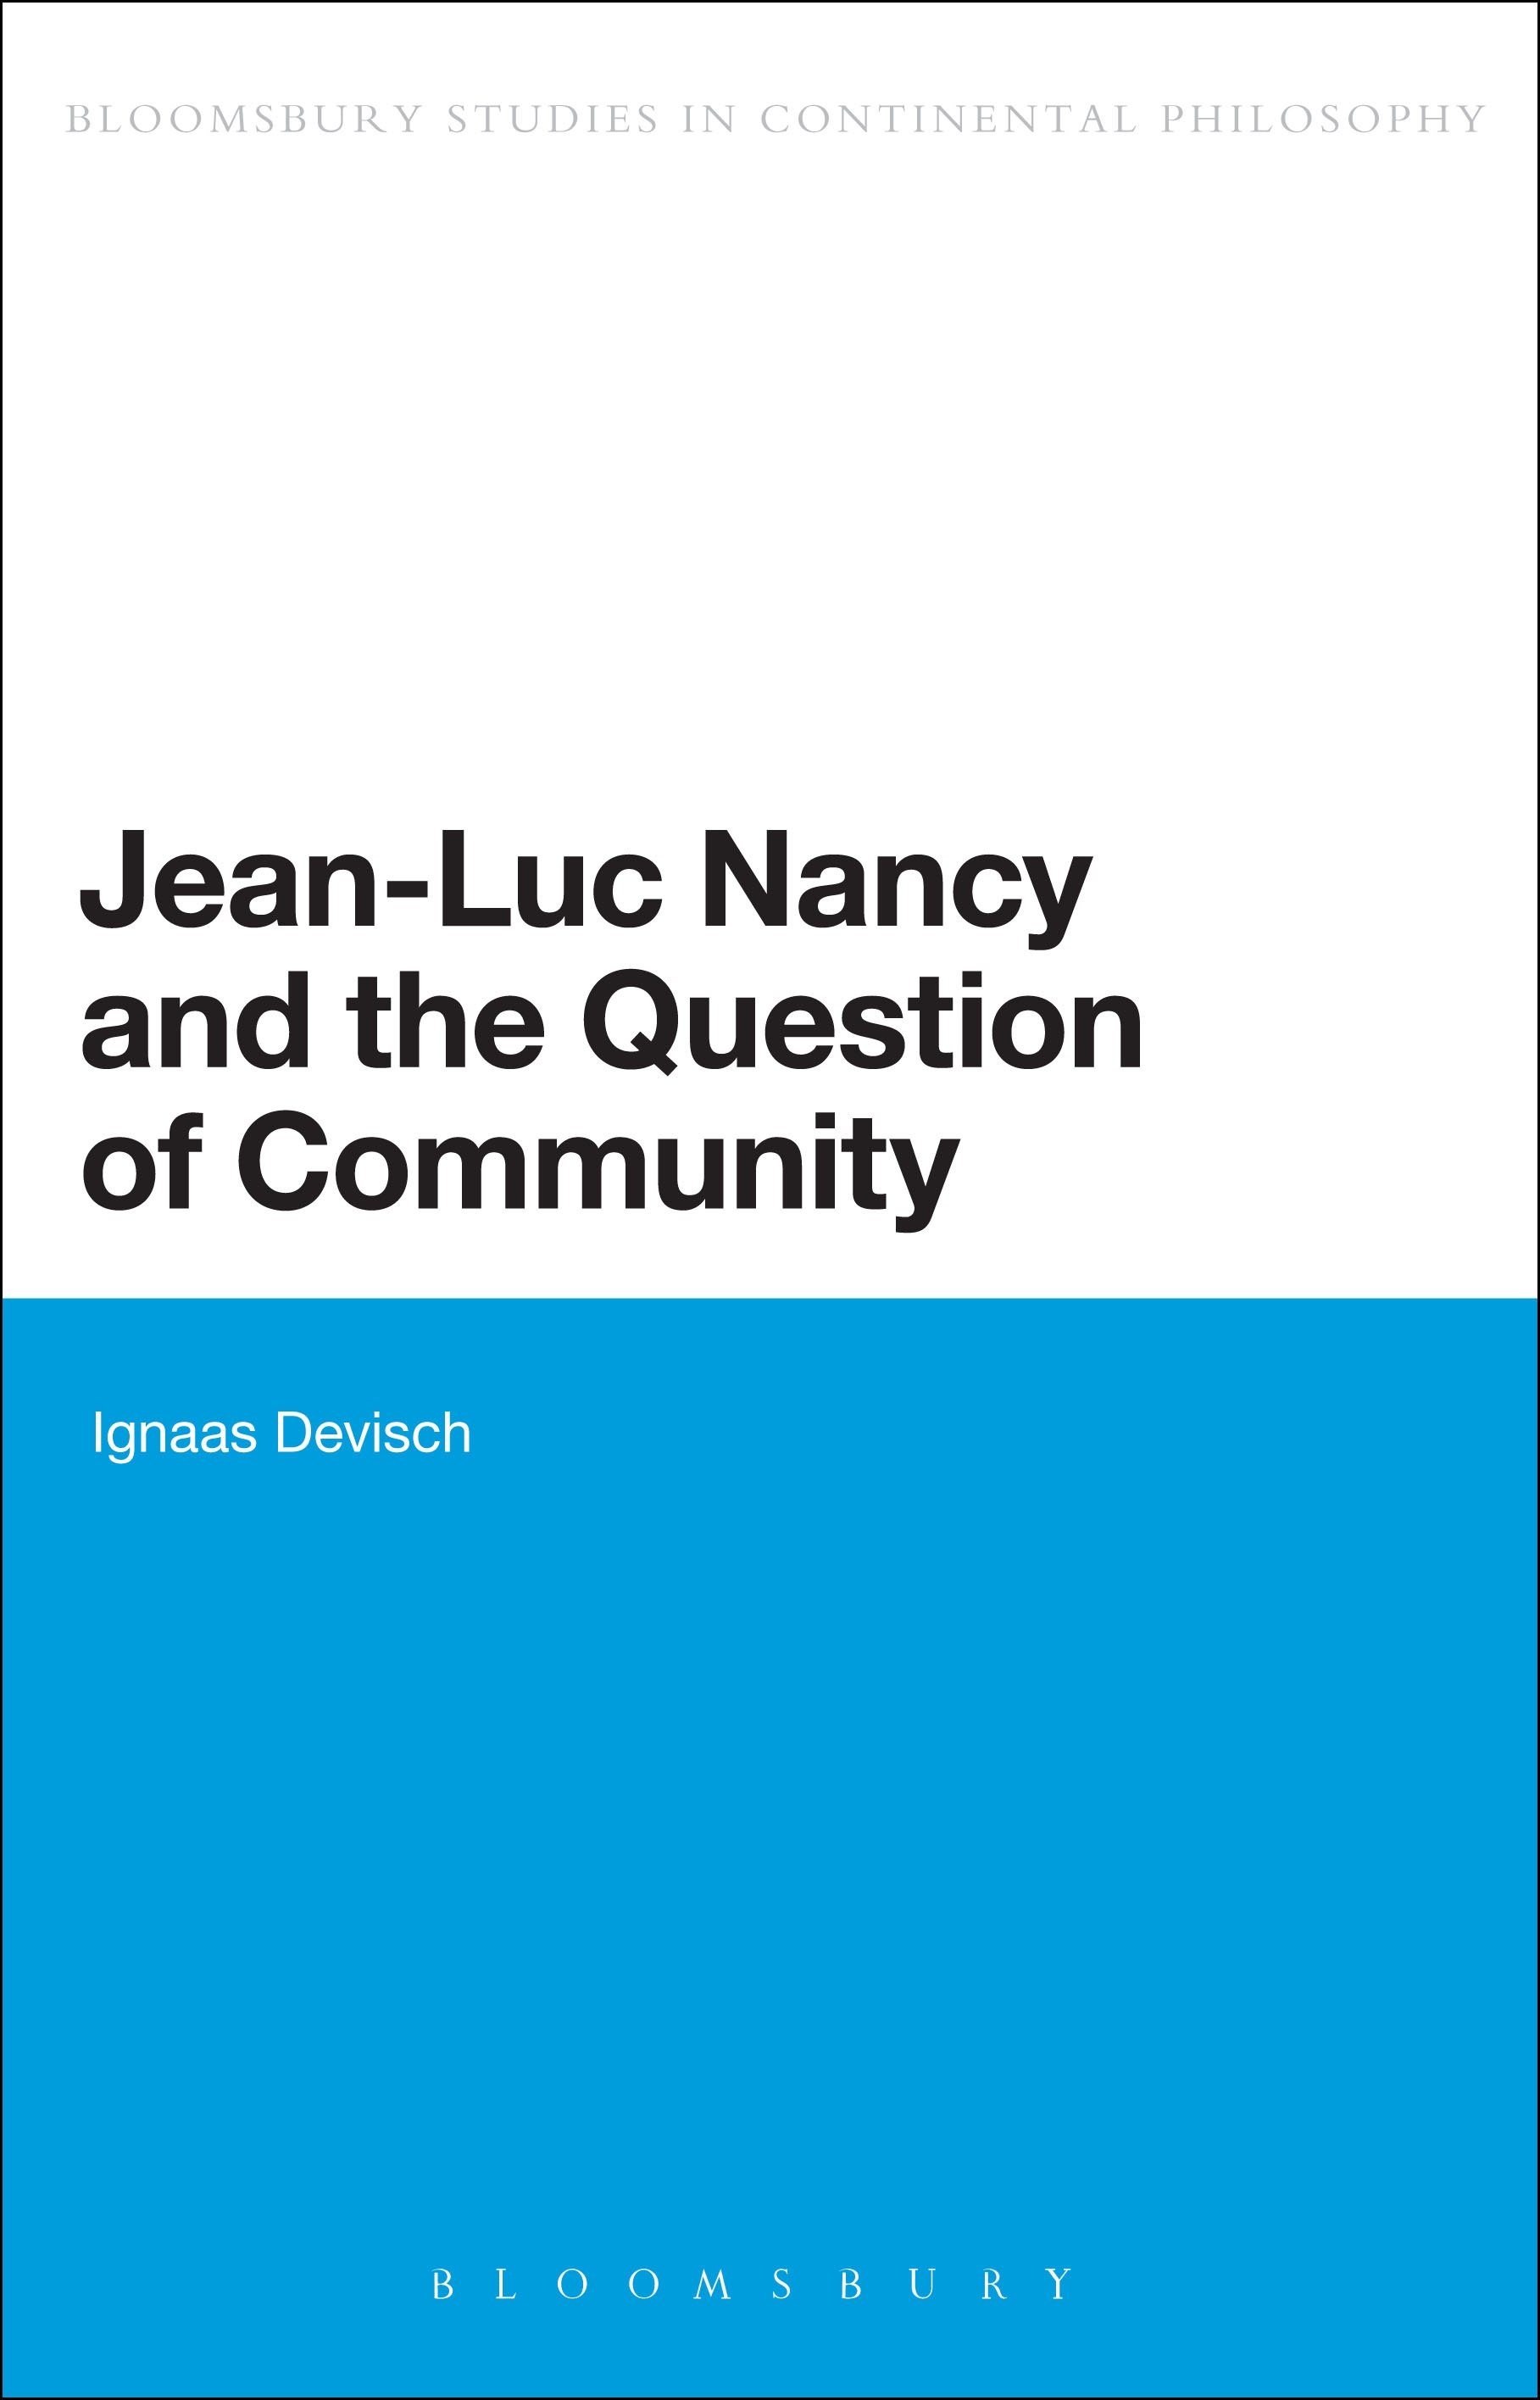 Jean-Luc Nancy and the Question of Community - 25-49.99